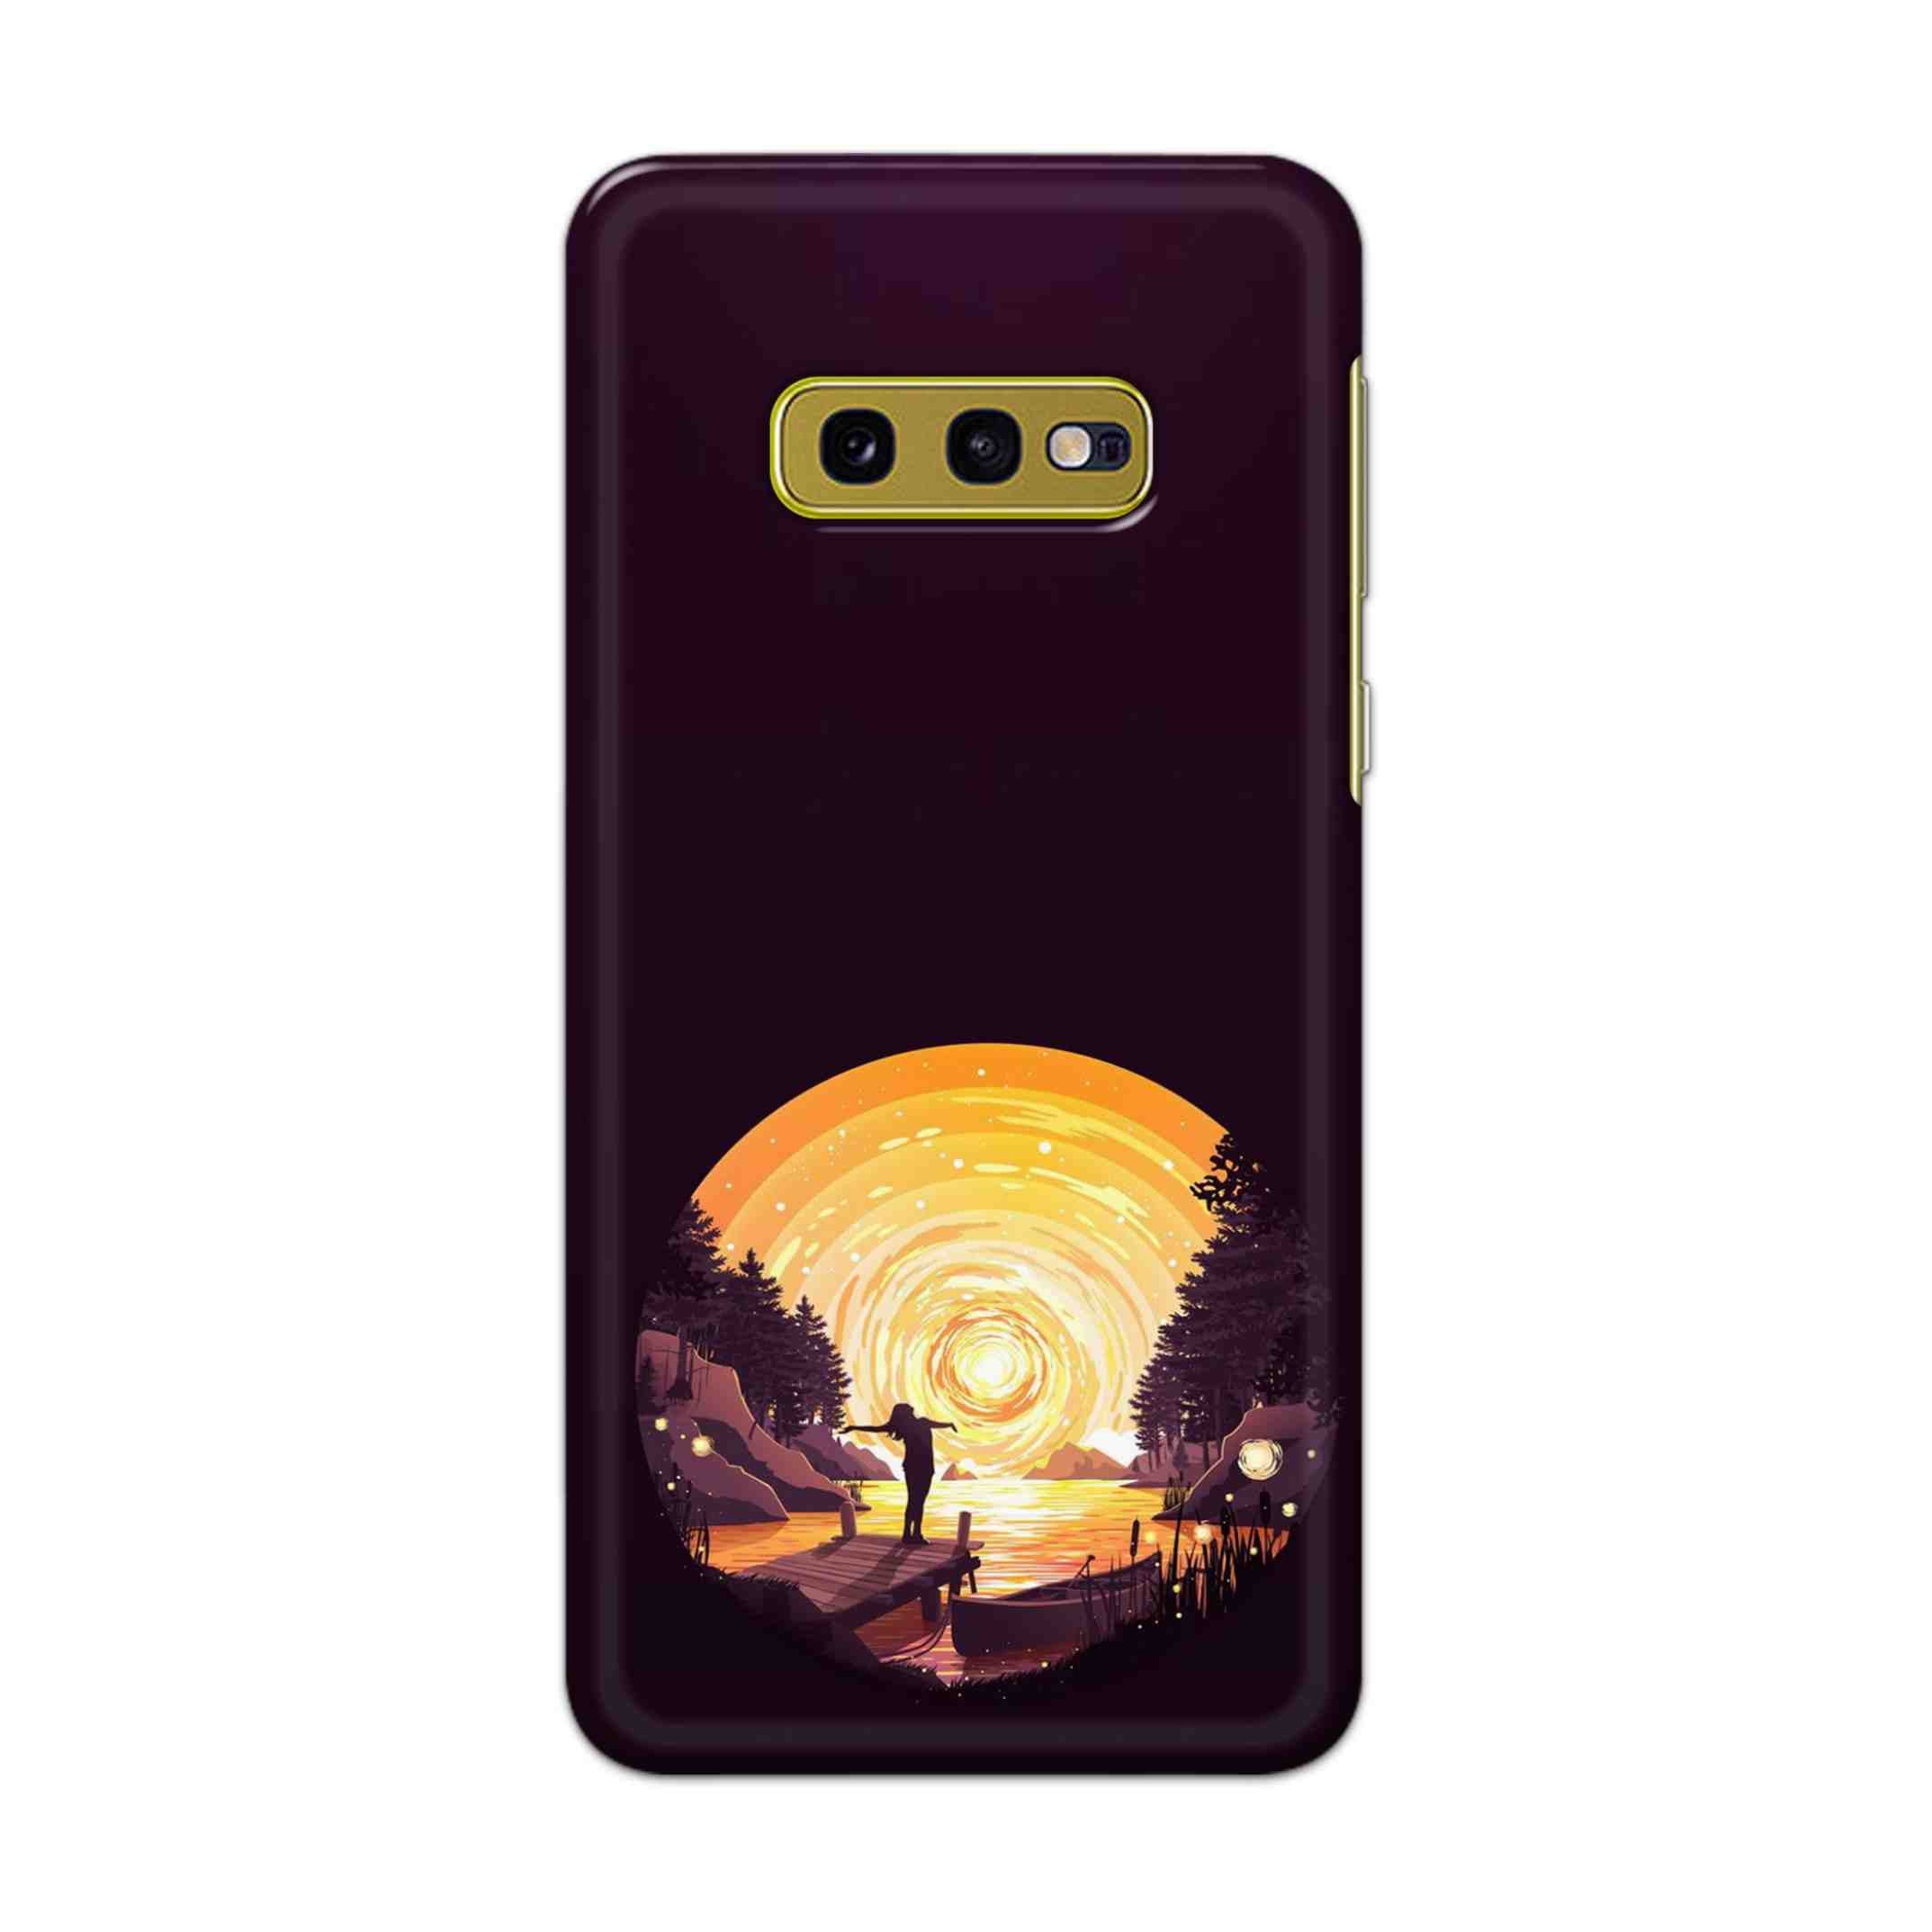 Buy Night Sunrise Hard Back Mobile Phone Case Cover For Samsung Galaxy S10e Online